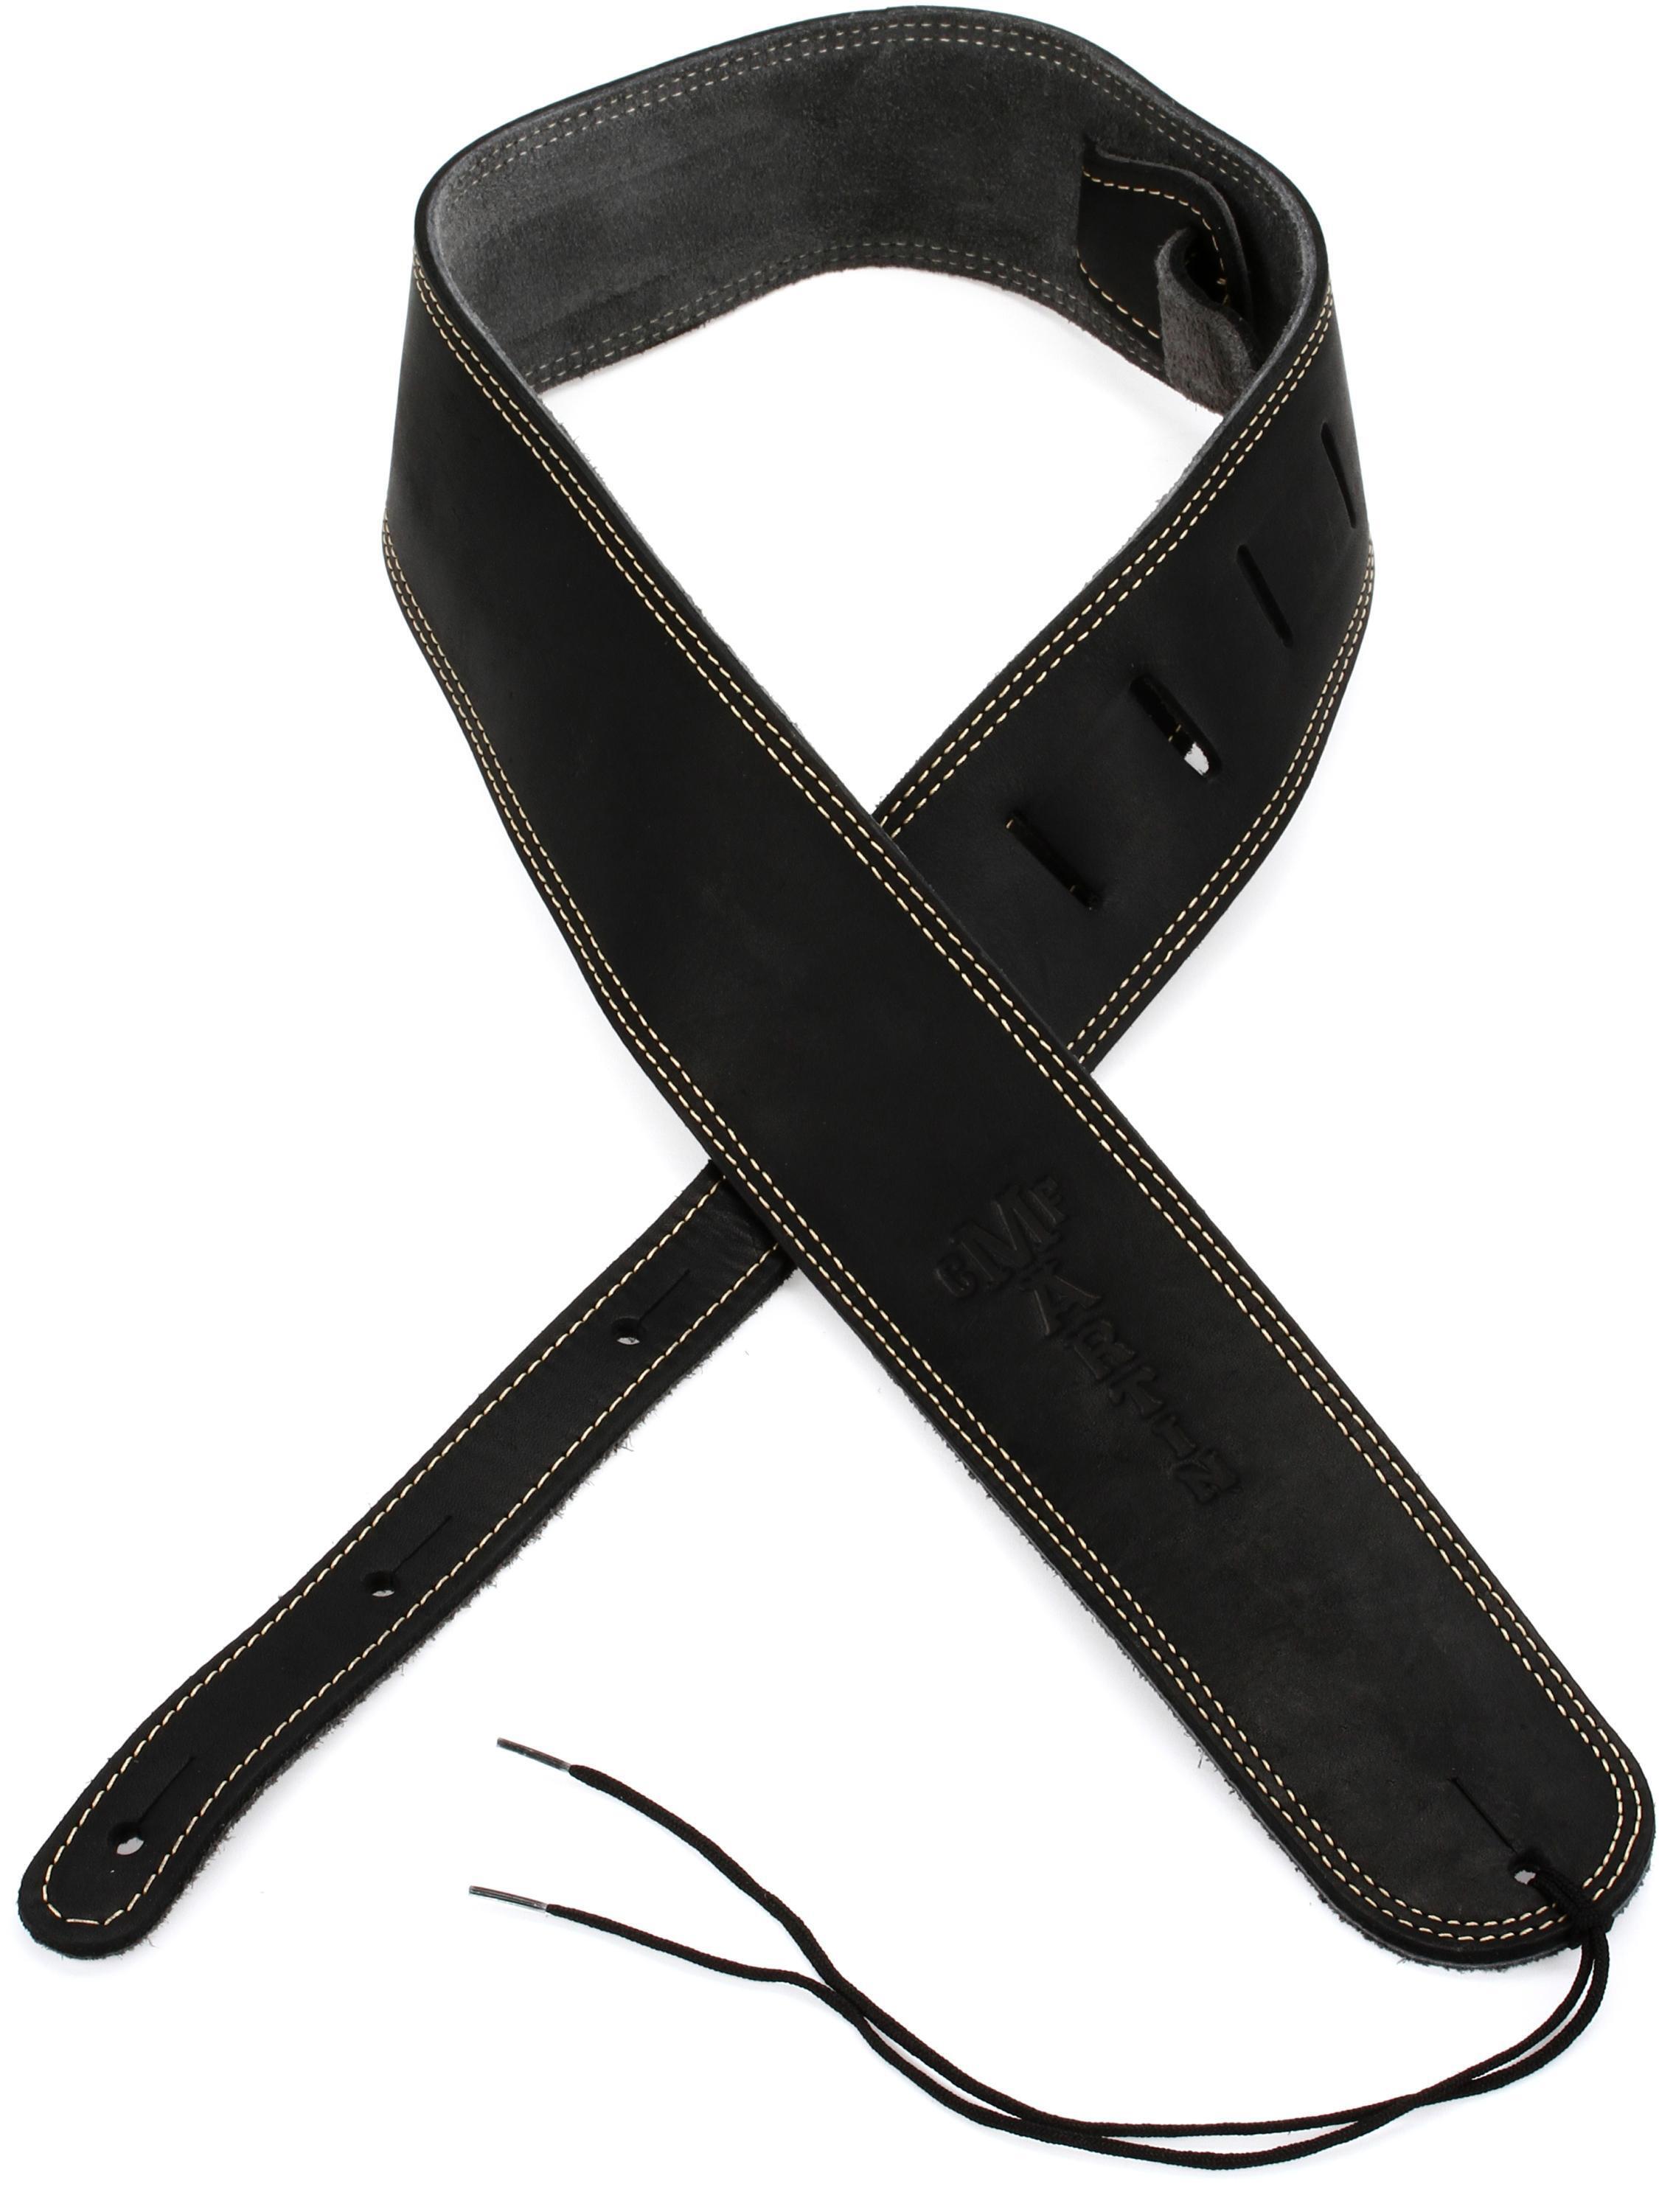 Martin Ball Glove Leather and Suede Guitar Strap - Black | Sweetwater